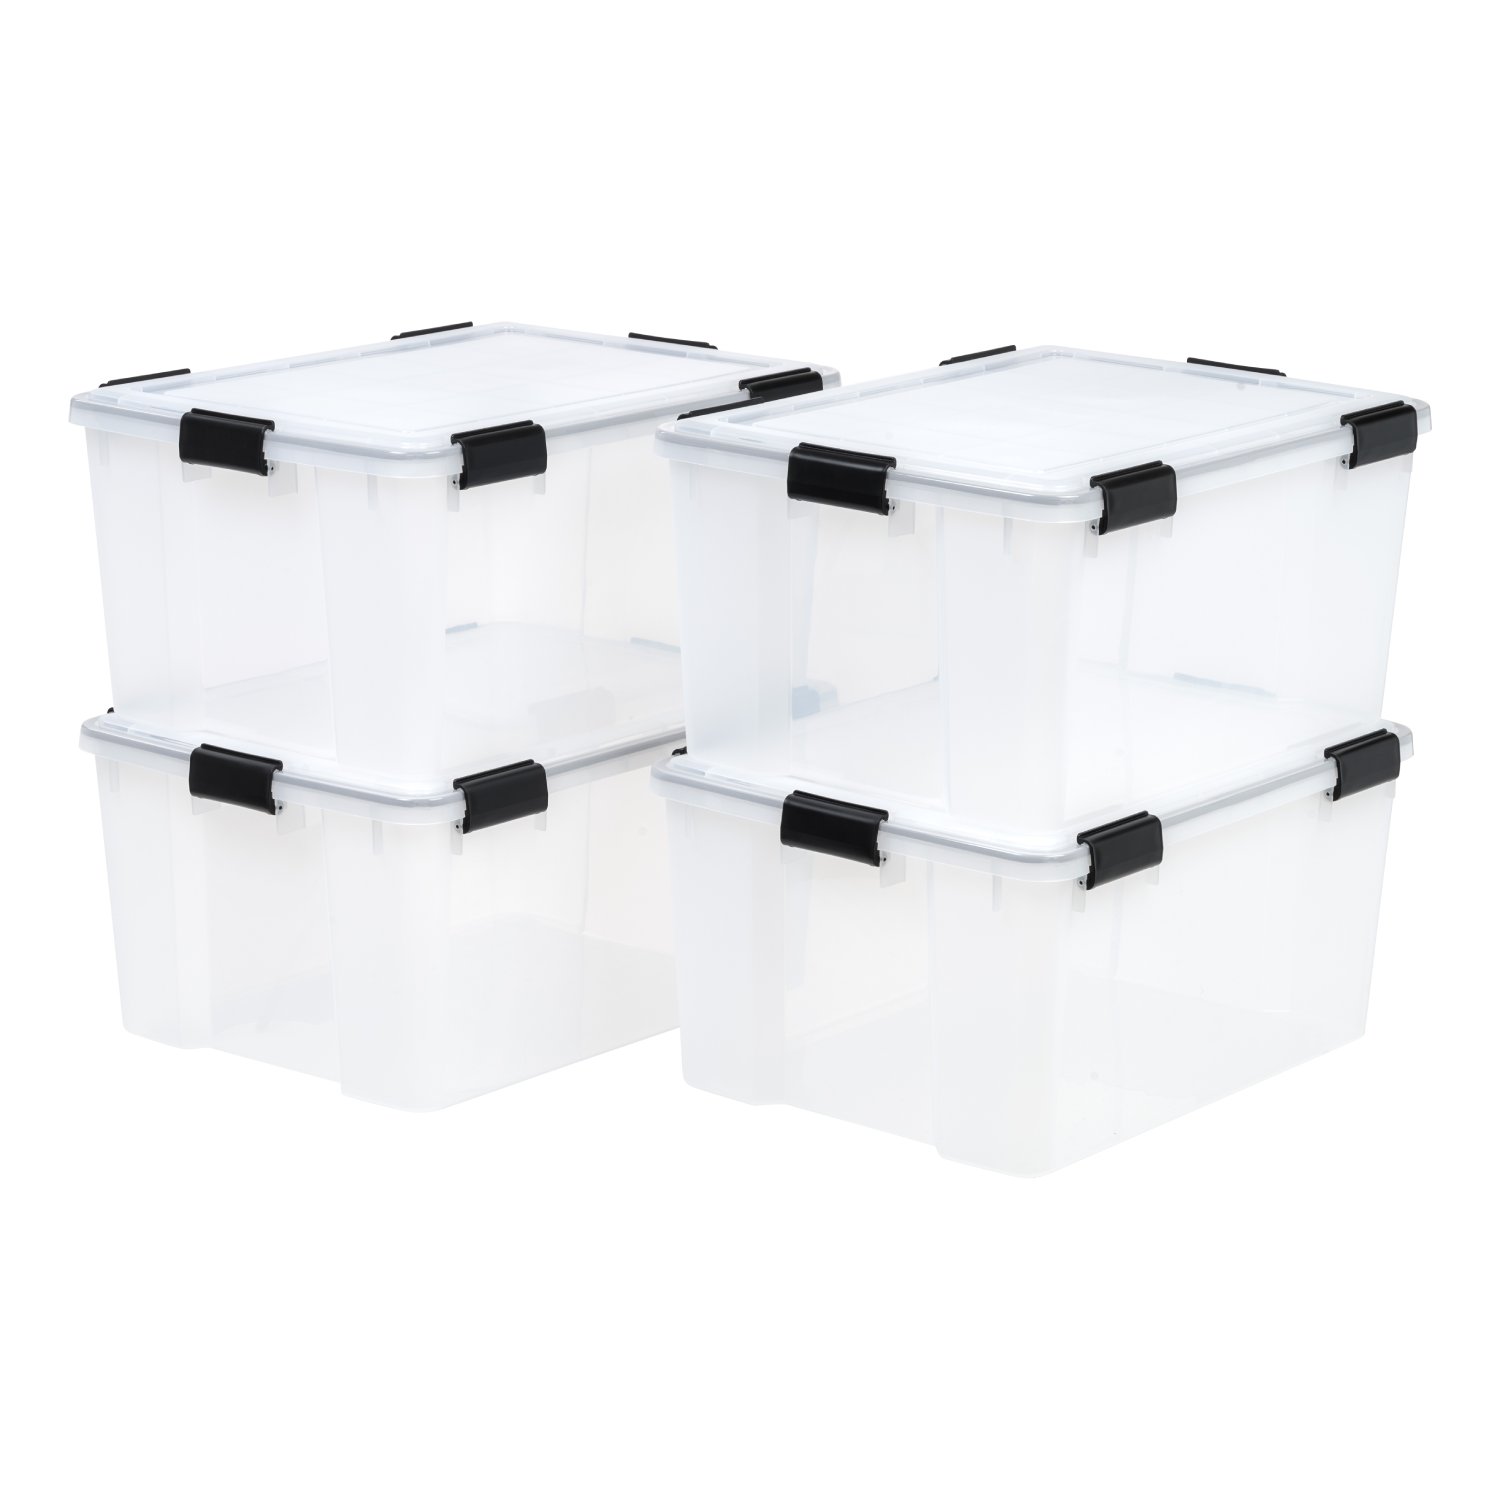 21 Inch Wide Plastic Storage Containers at